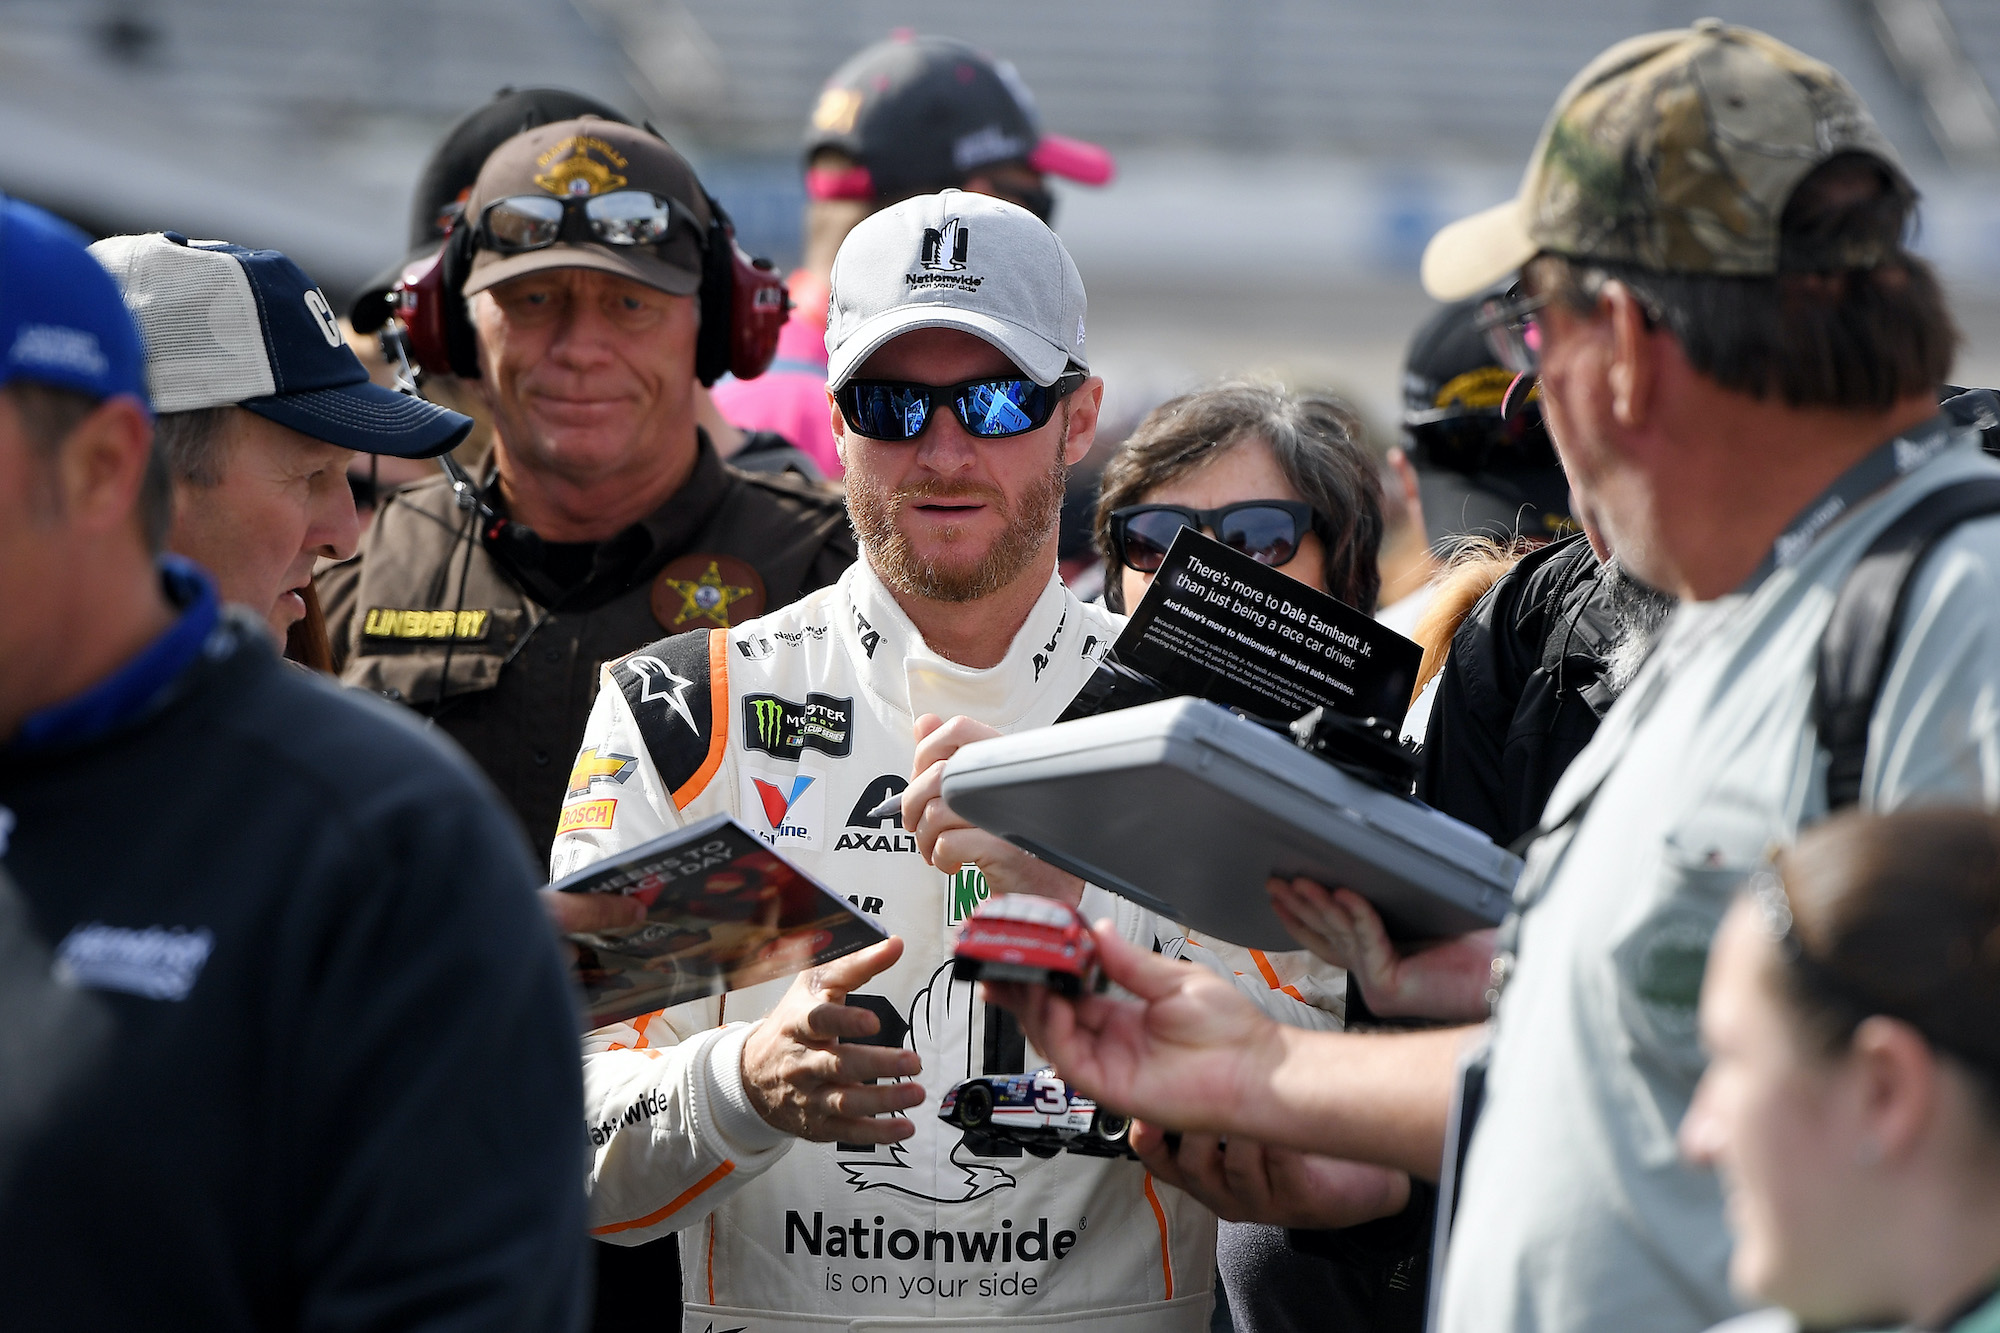 Dale Earnhardt Jr. Bluntly Admits There’s 1 Specific Type of Autograph Seeker He Tries to Avoid Because They Make Him Uncomfortable